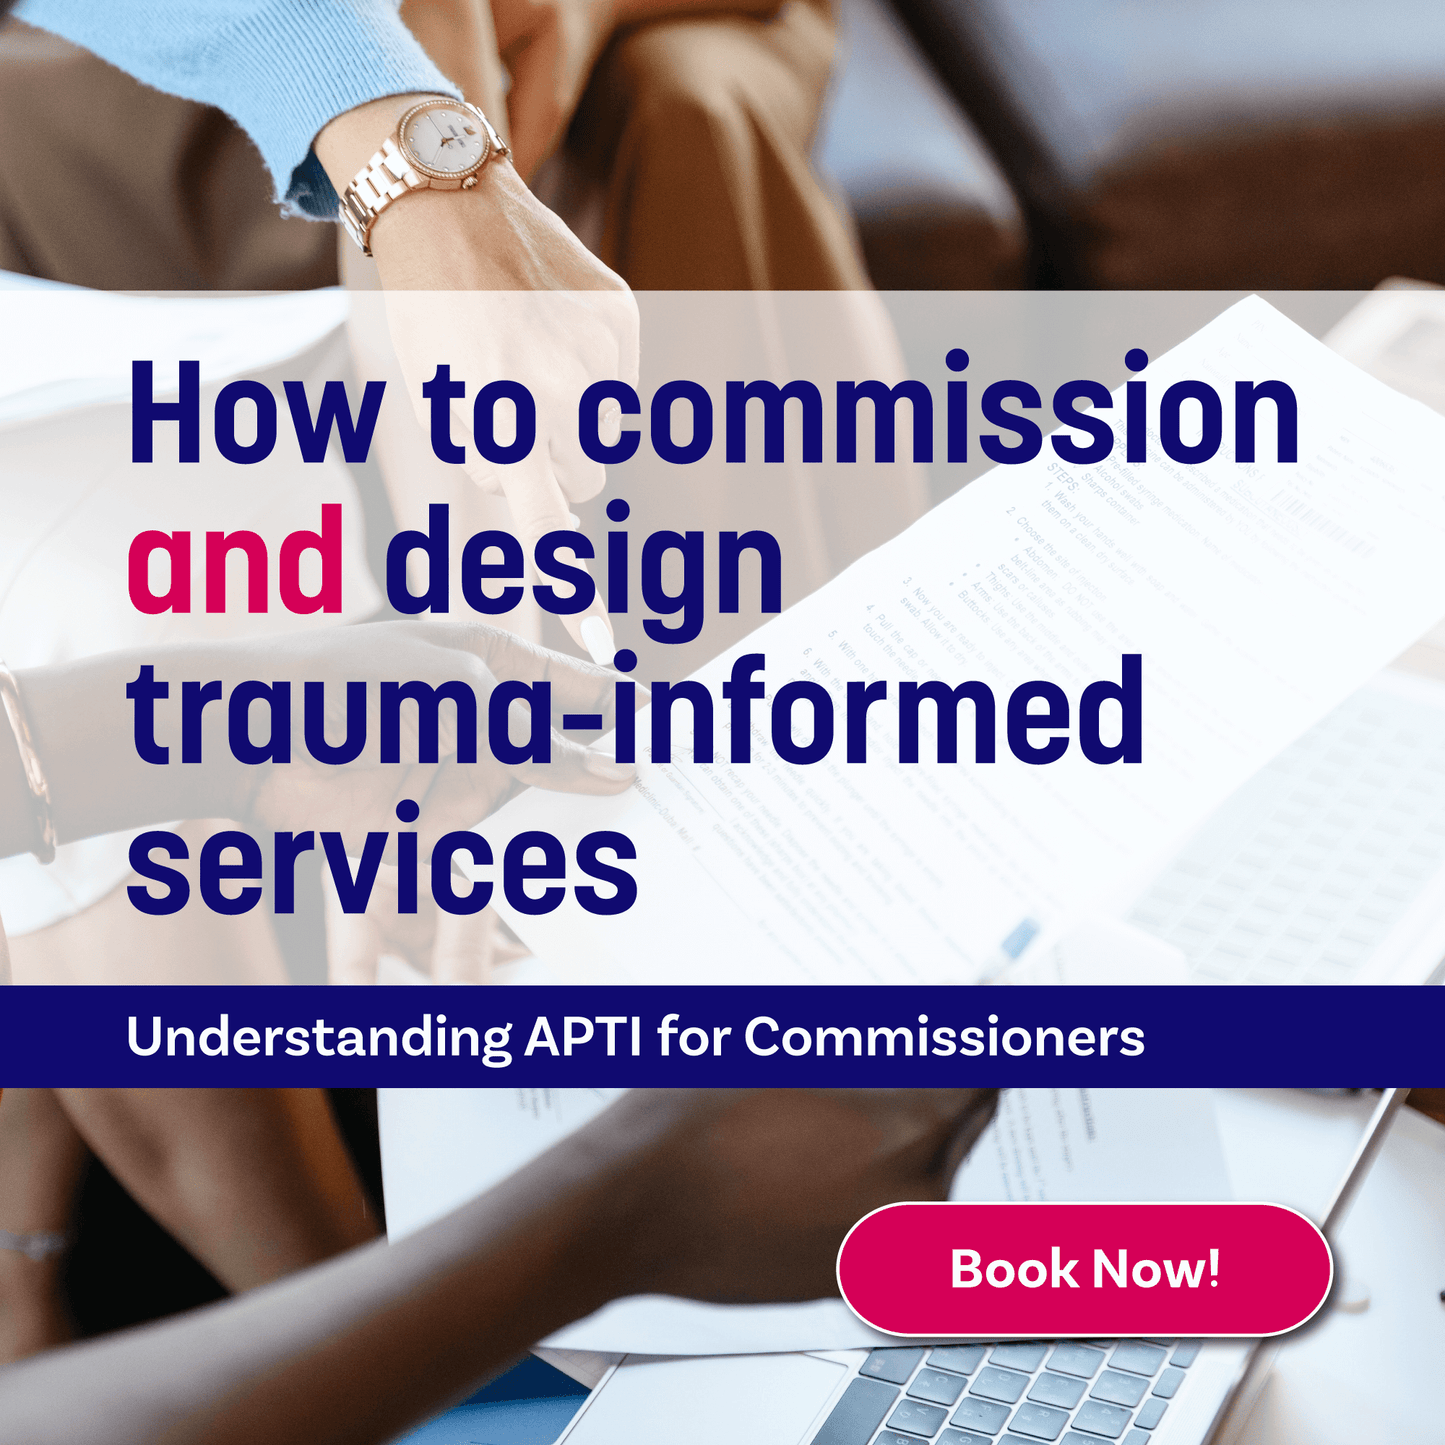 How to Commission and Design Trauma-Informed Services: Understanding APTI for Commissioners